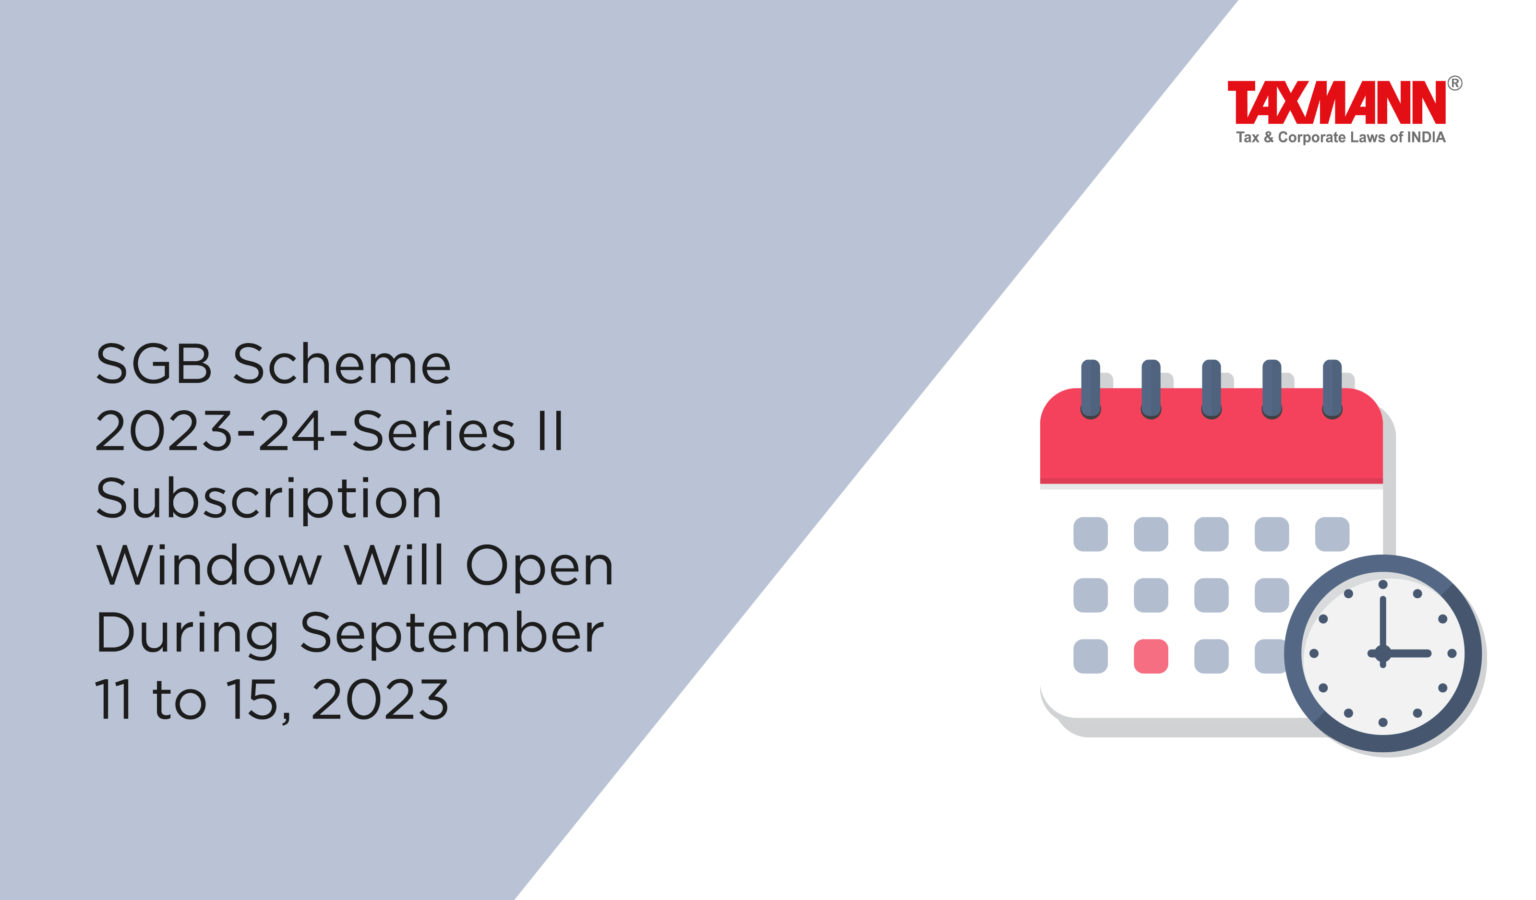 SGB Scheme 202324Series II Subscription Window Will Open During